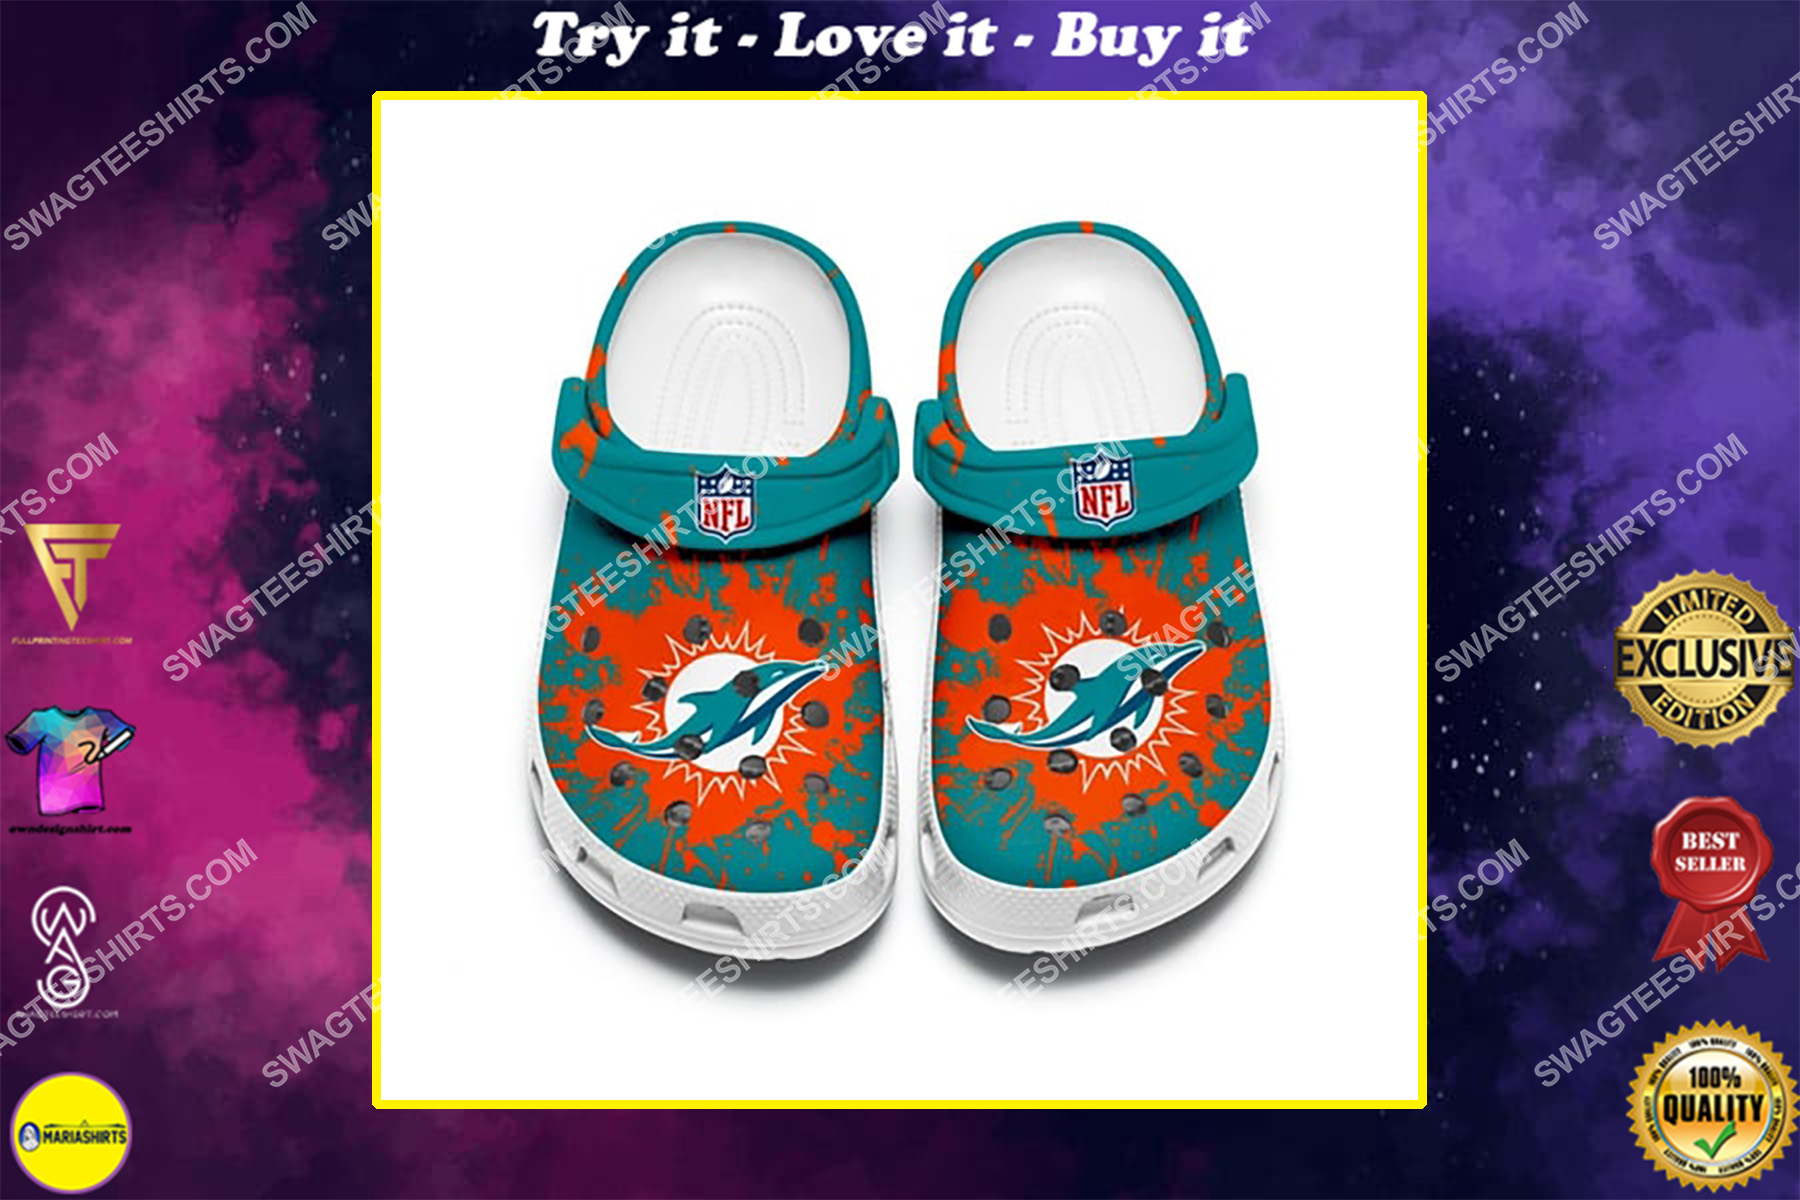 the miami dolphins all over printed crocs